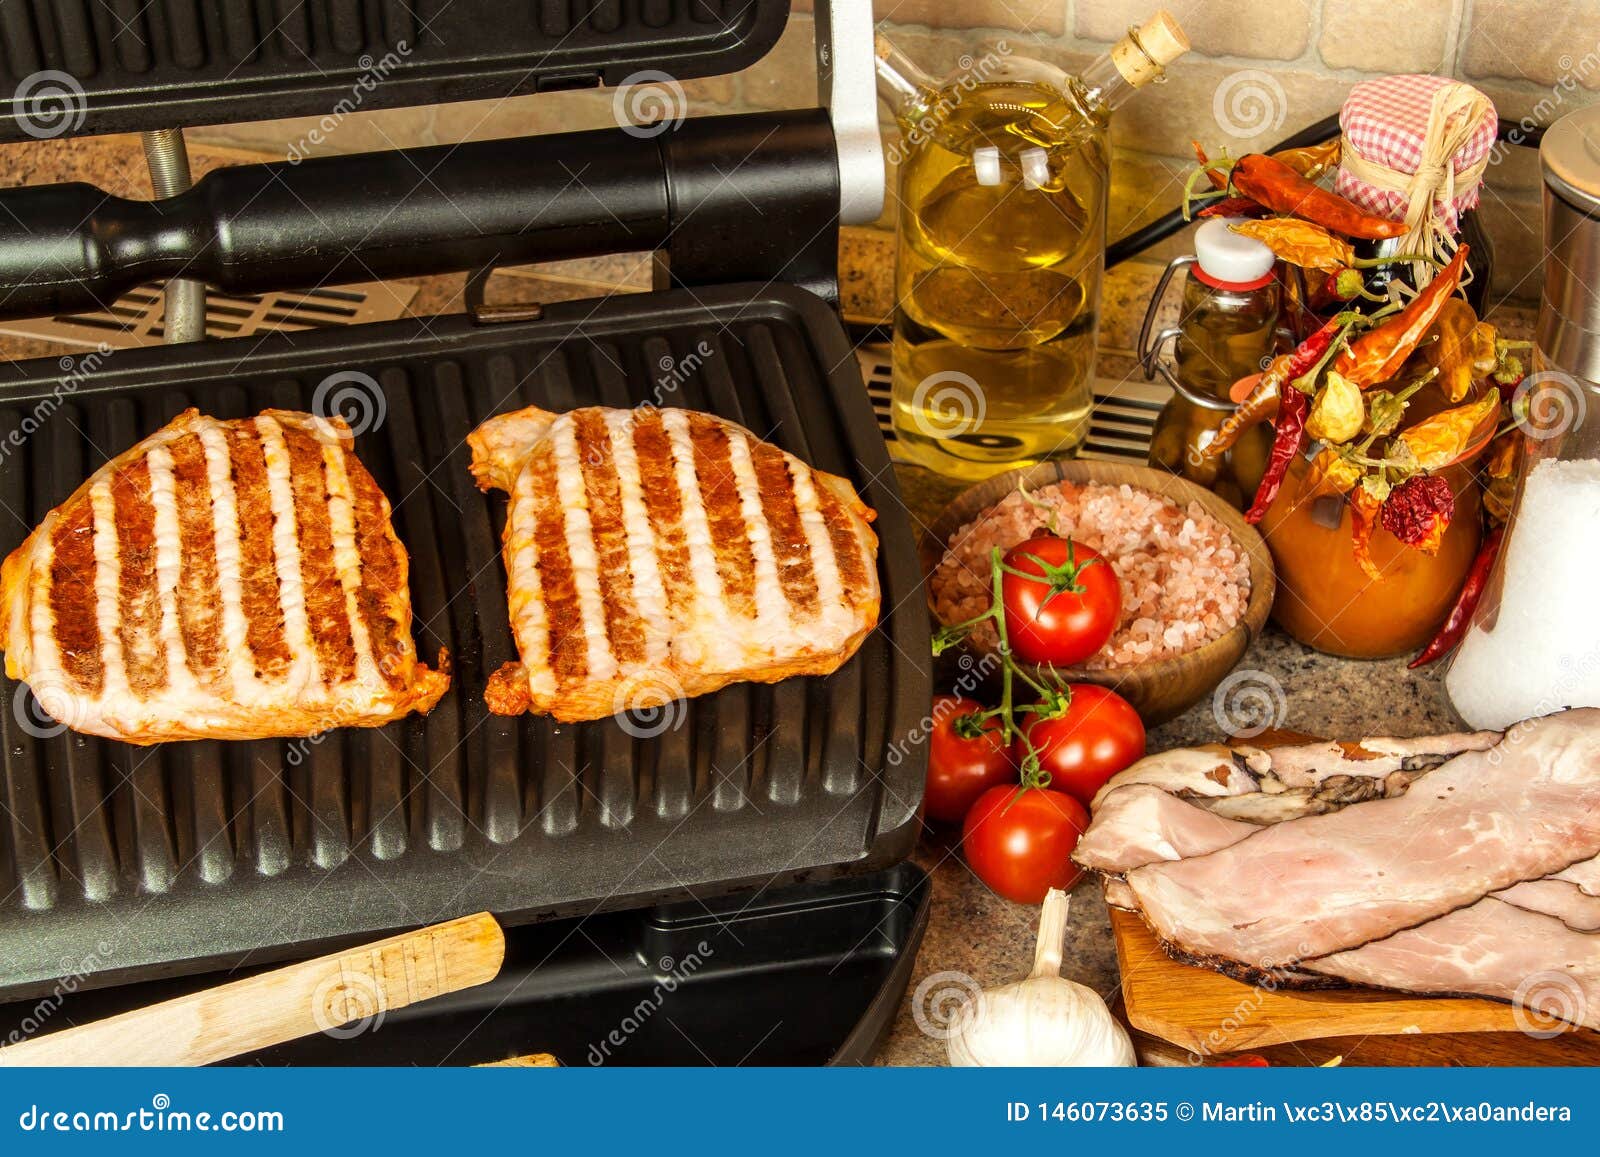 Grill Steak On An Electric Stove Pork Neck Fried On Small Electric Grill Home Cooking Healthy Barbecue Catering To Friends Stock Image Image Of Barbecuing Cook 146073635